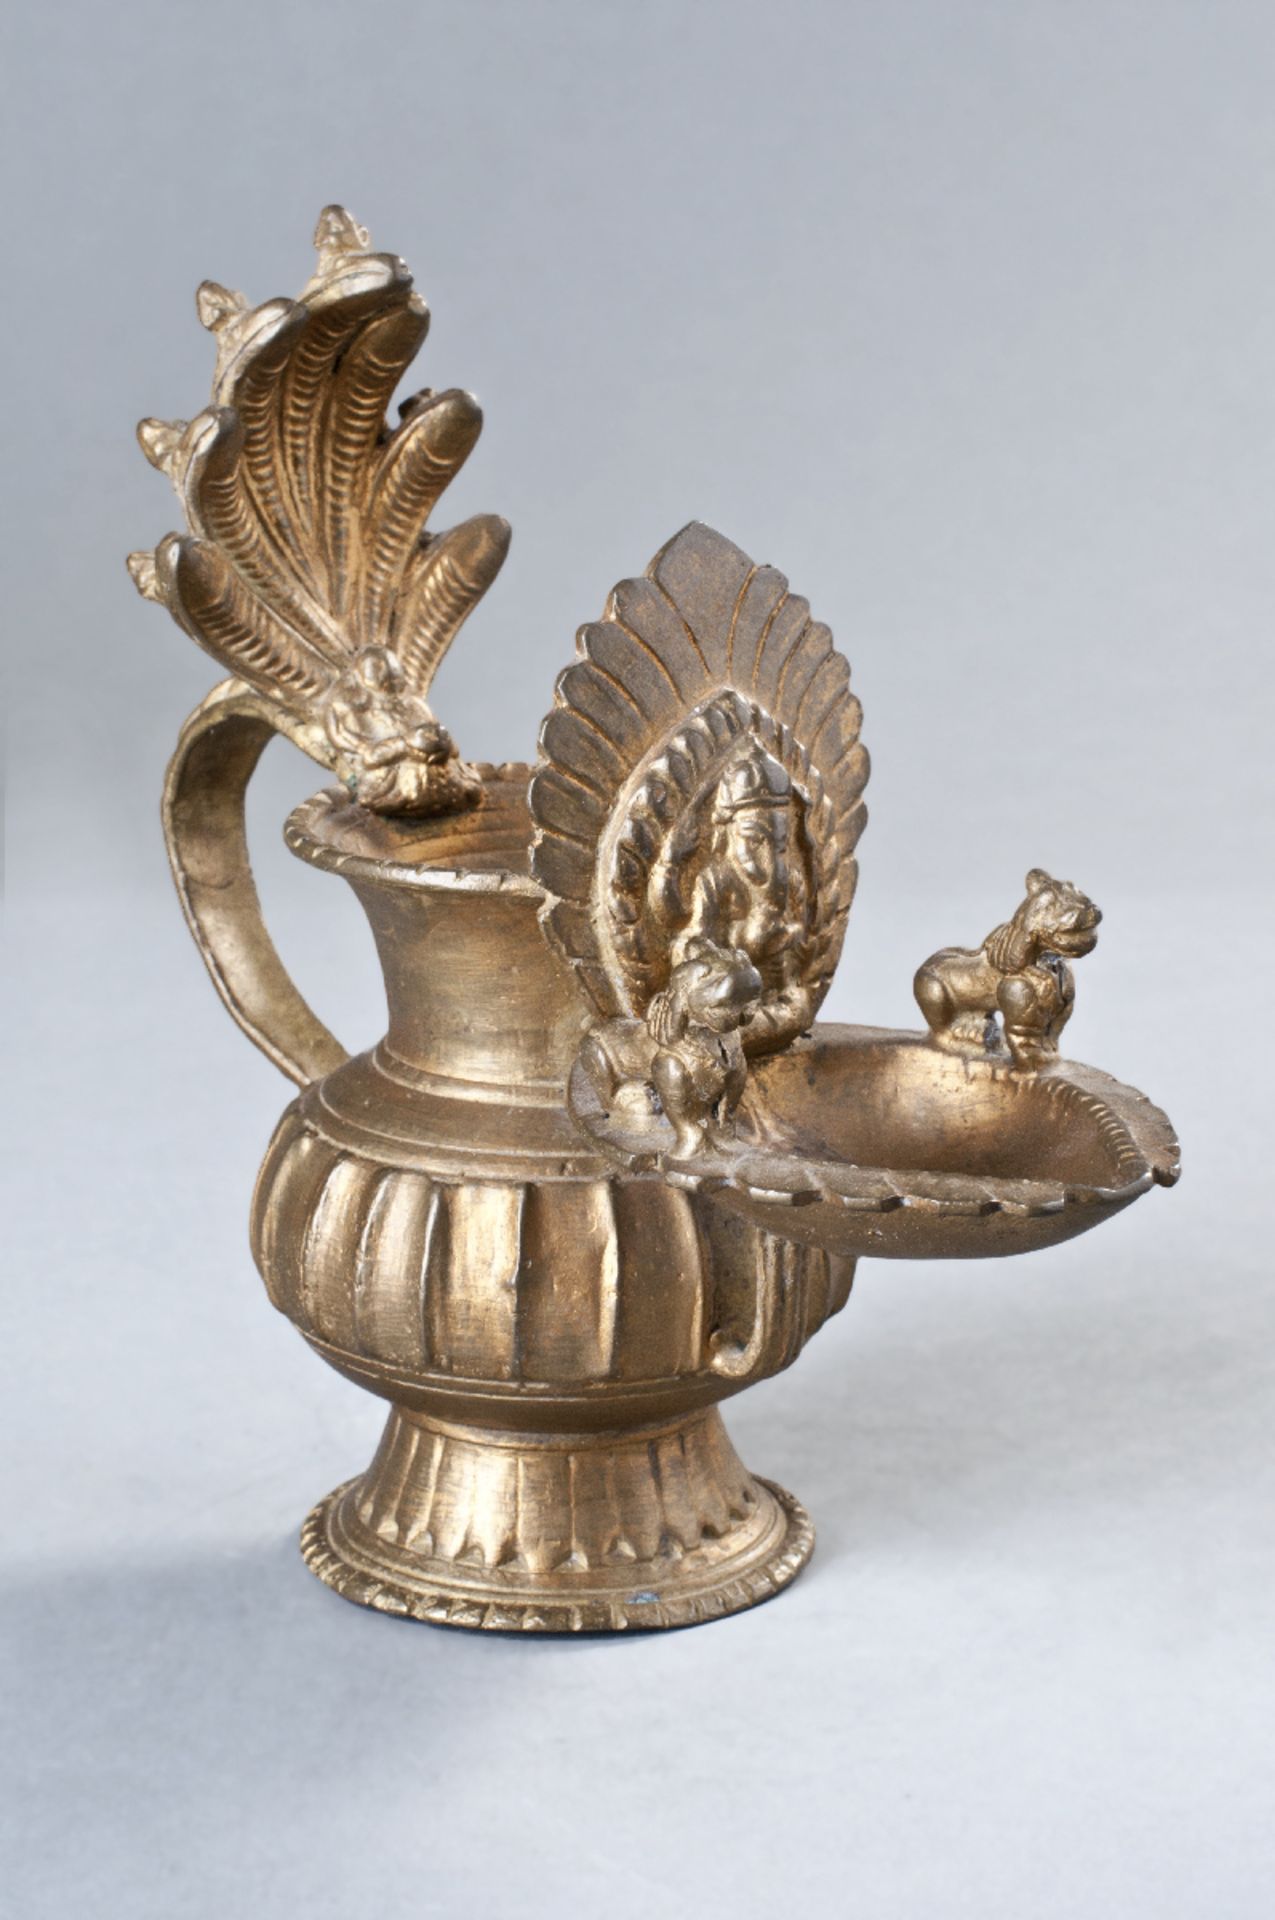 DECORATIVE VESSEL WITH NAGA  Bronze with paint gilding, Nepal, 20th century  An ornamental